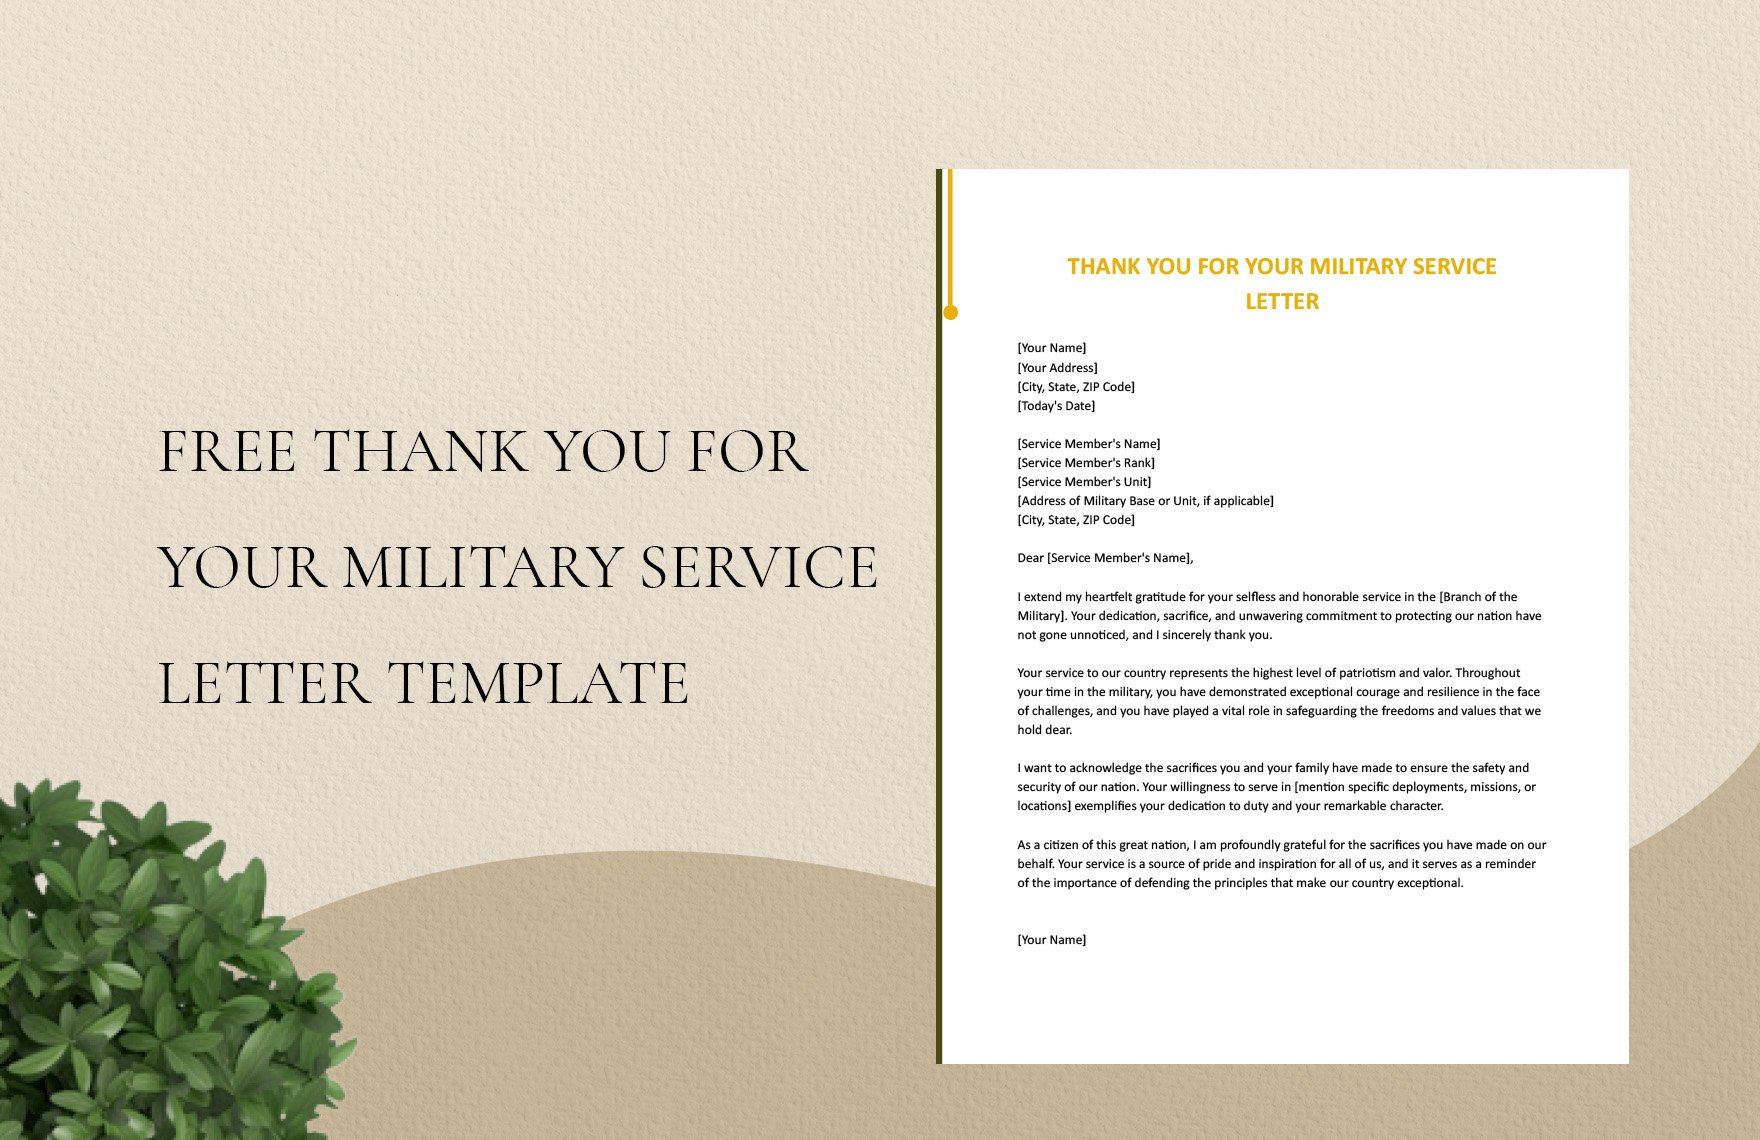 Thank You For Your Military Service Letter Template